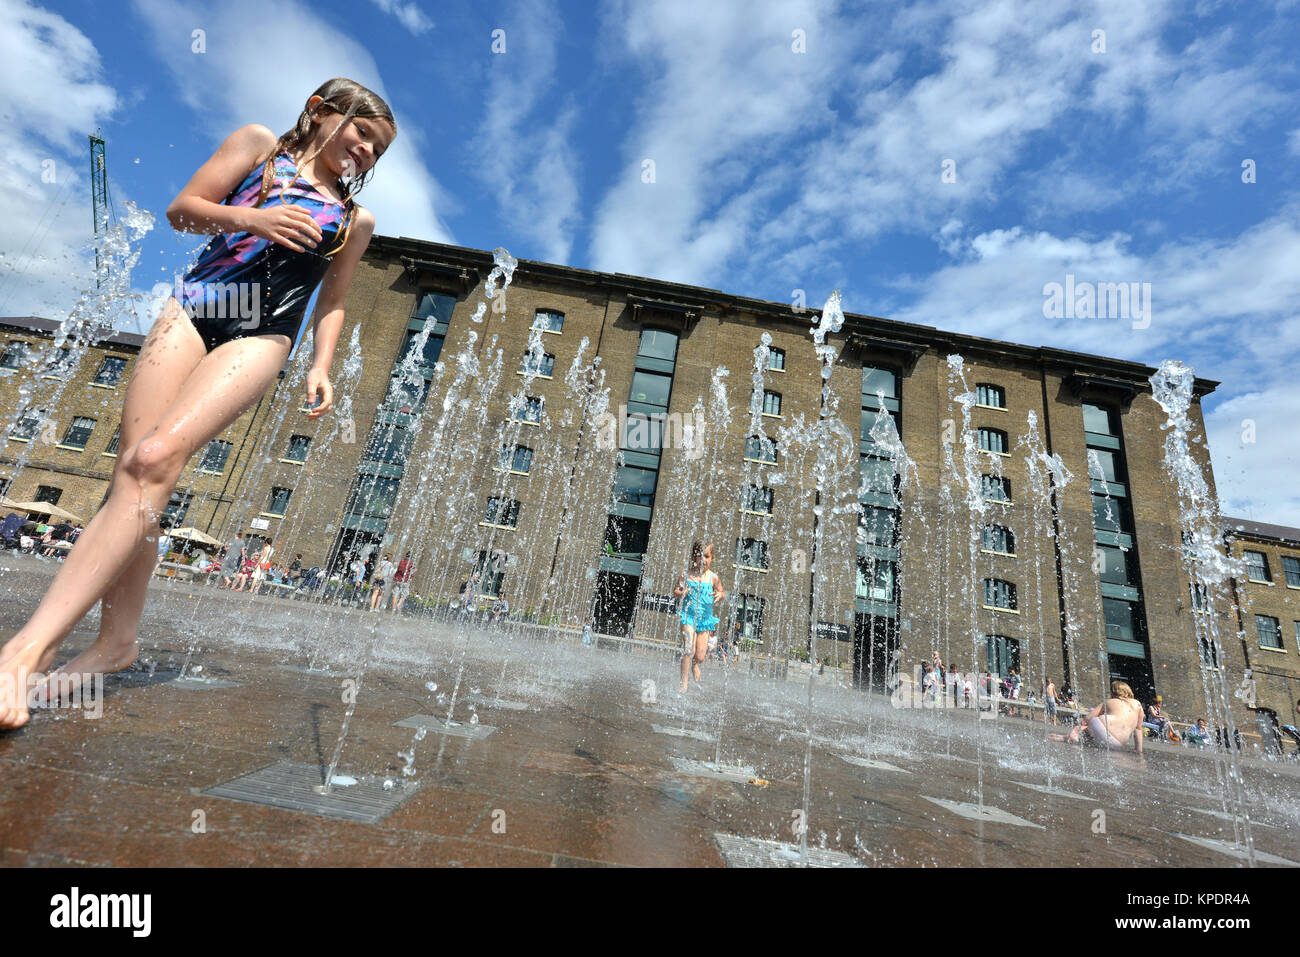 Granary Square, Camden, Kings Cross development, privately owned public space in London, UK Stock Photo